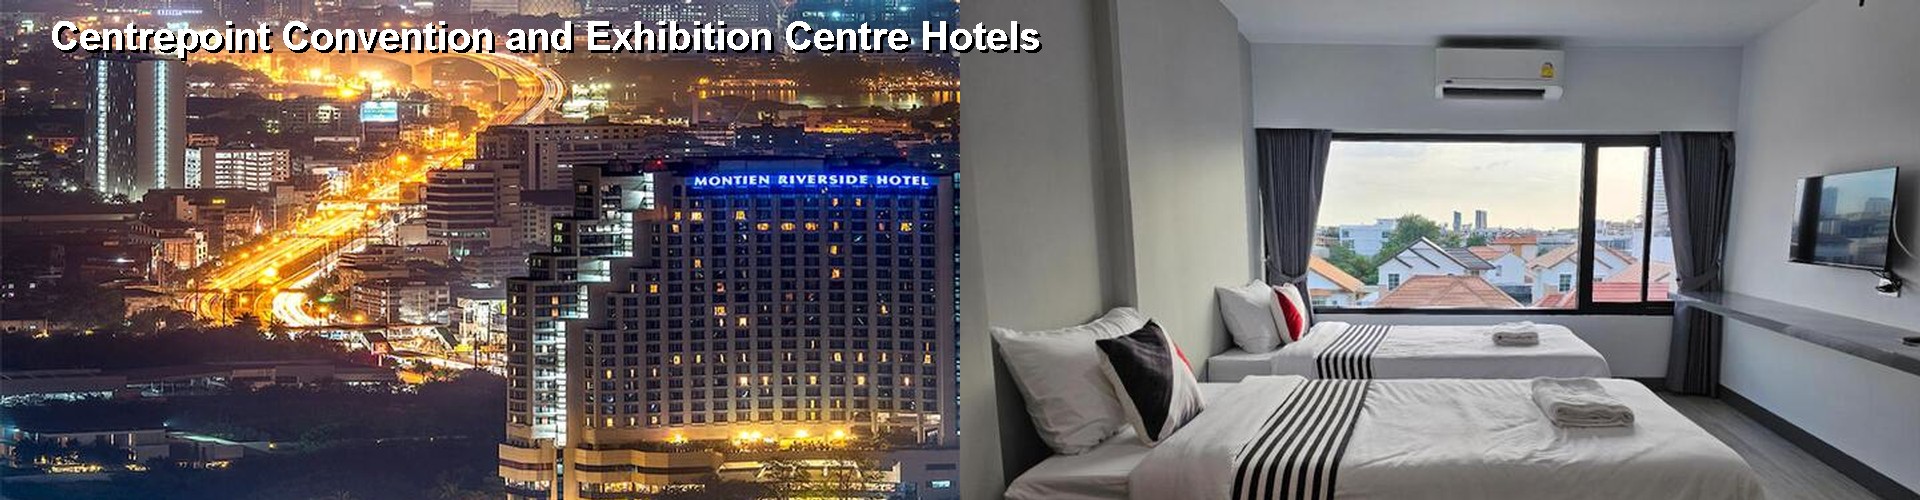 5 Best Hotels near Centrepoint Convention and Exhibition Centre